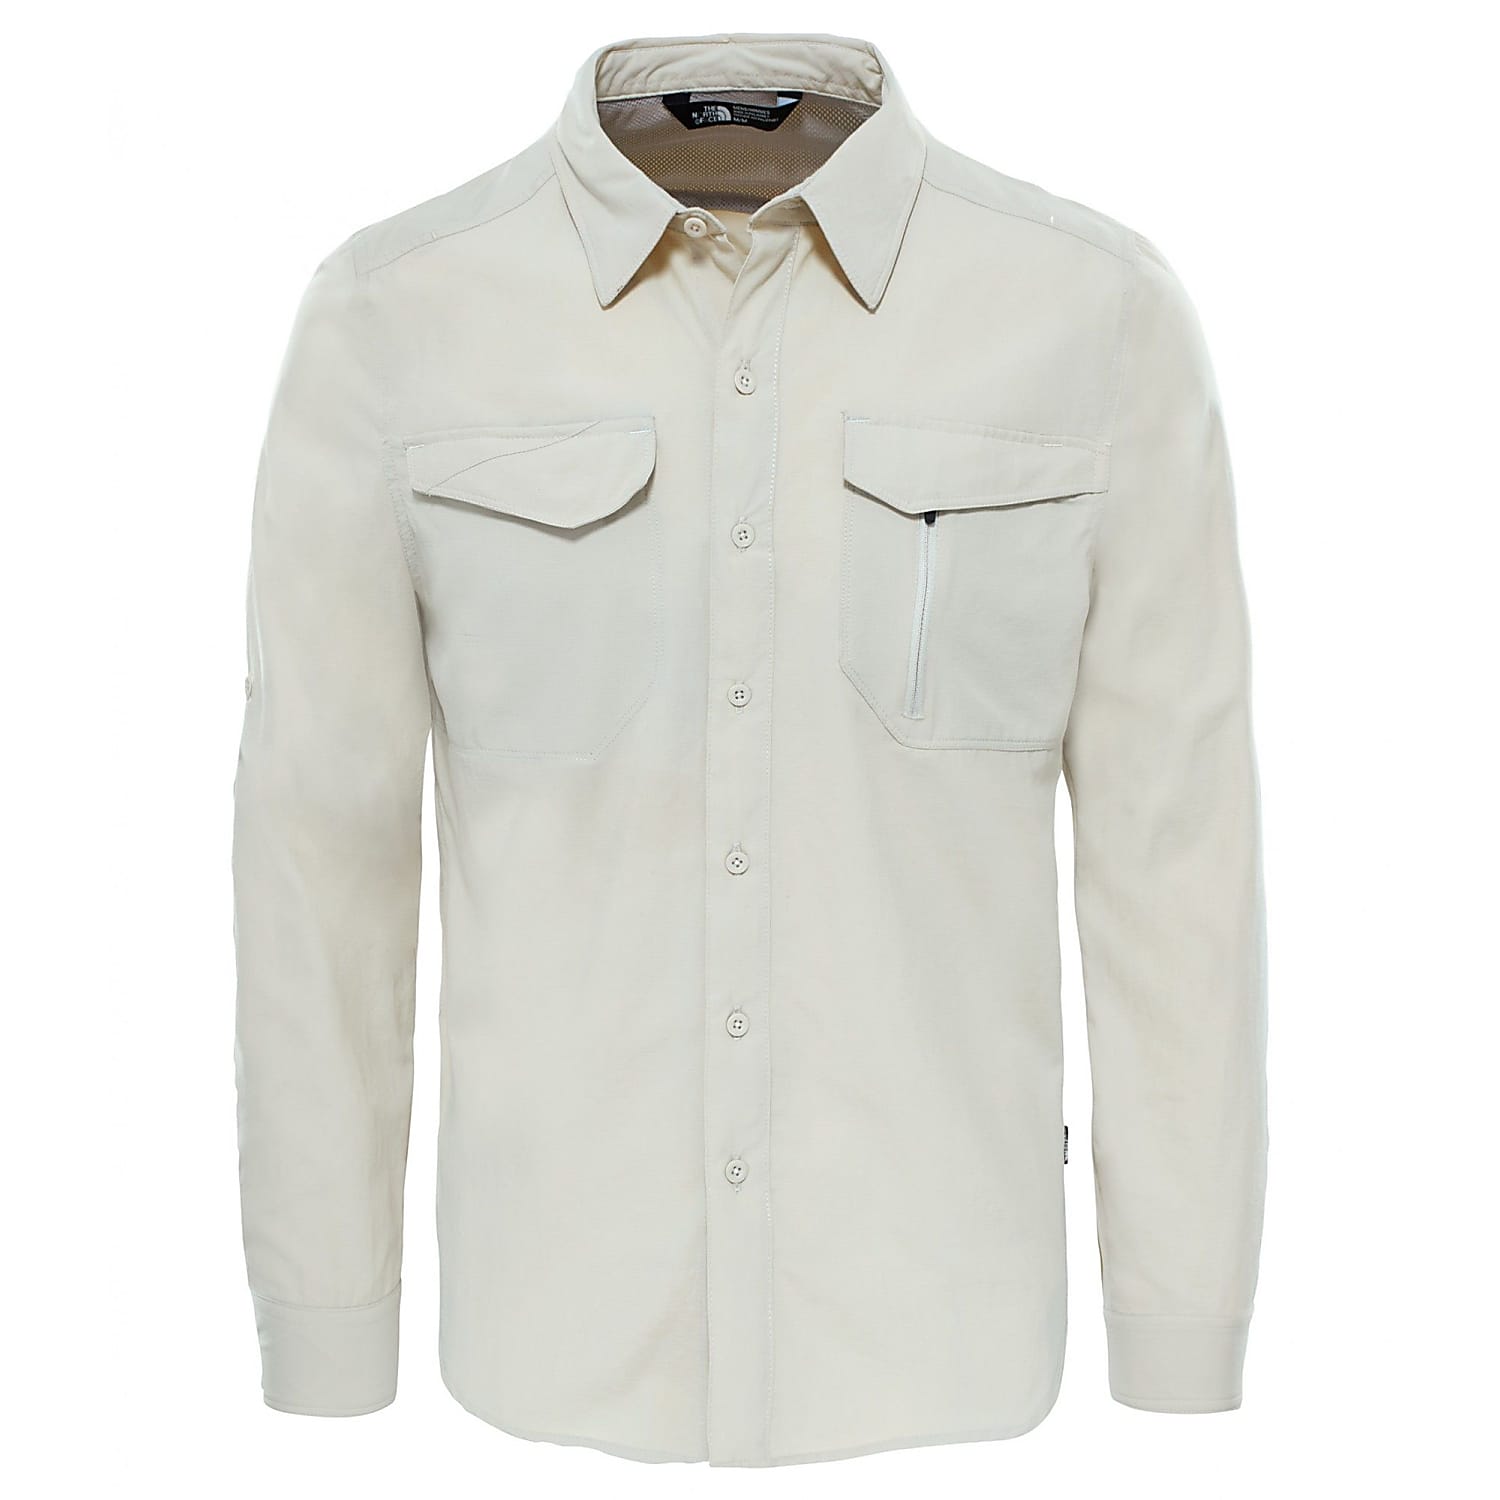 north face sequoia shirt